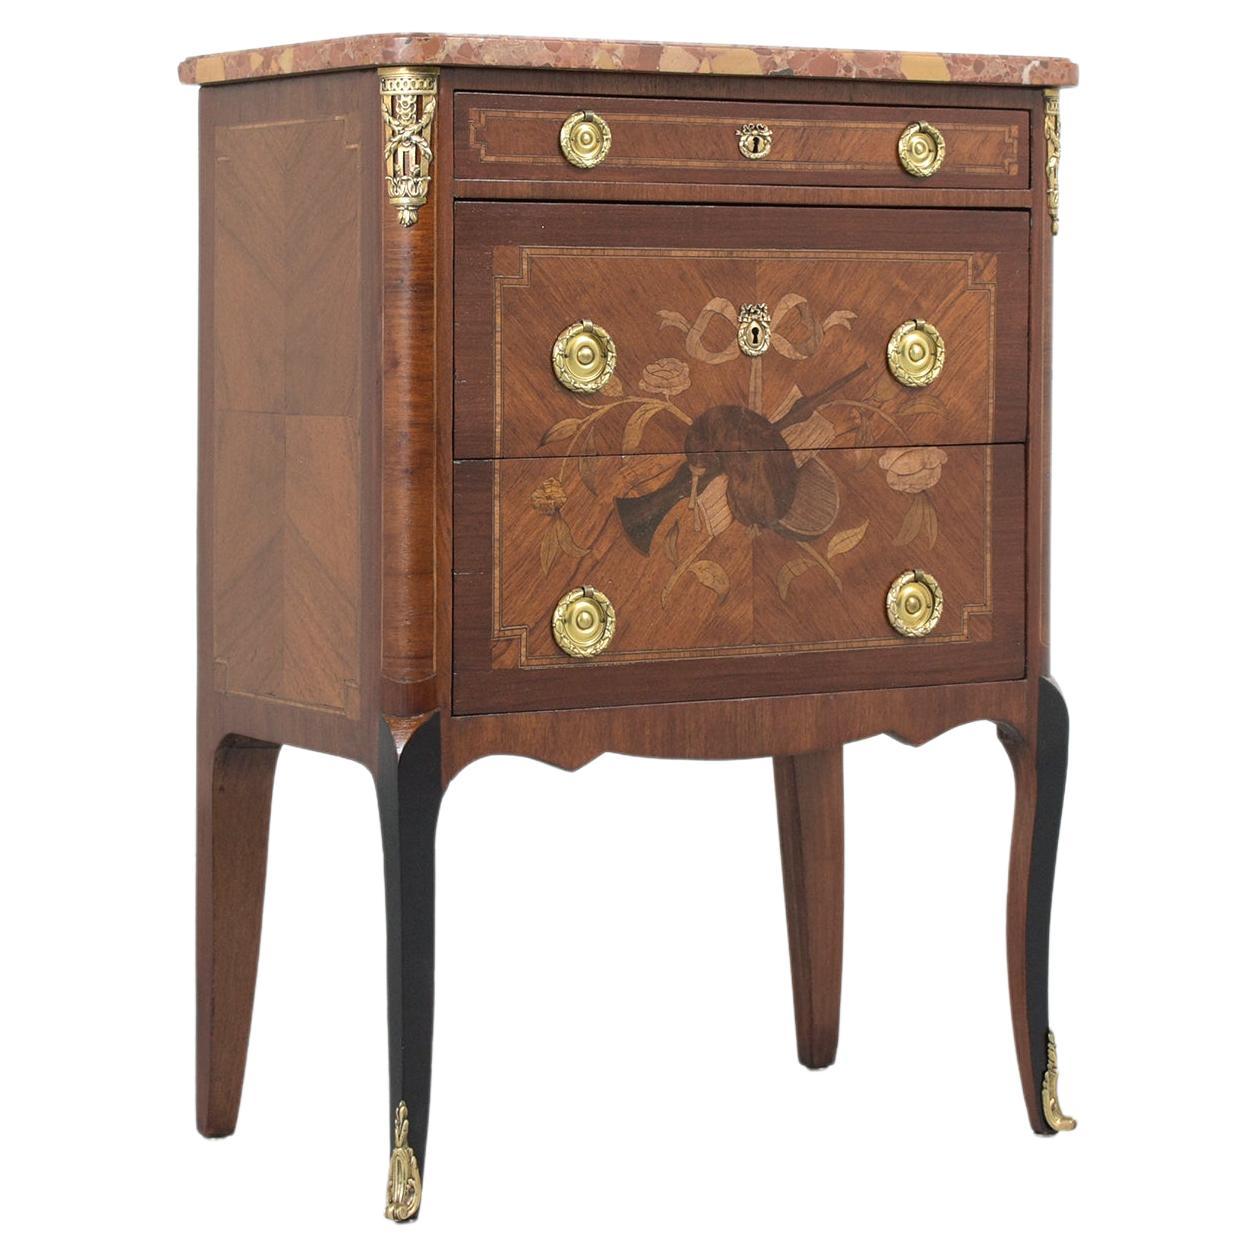 Restored Antique Louis XVI Mahogany Marble Top Commode with Brass Handles